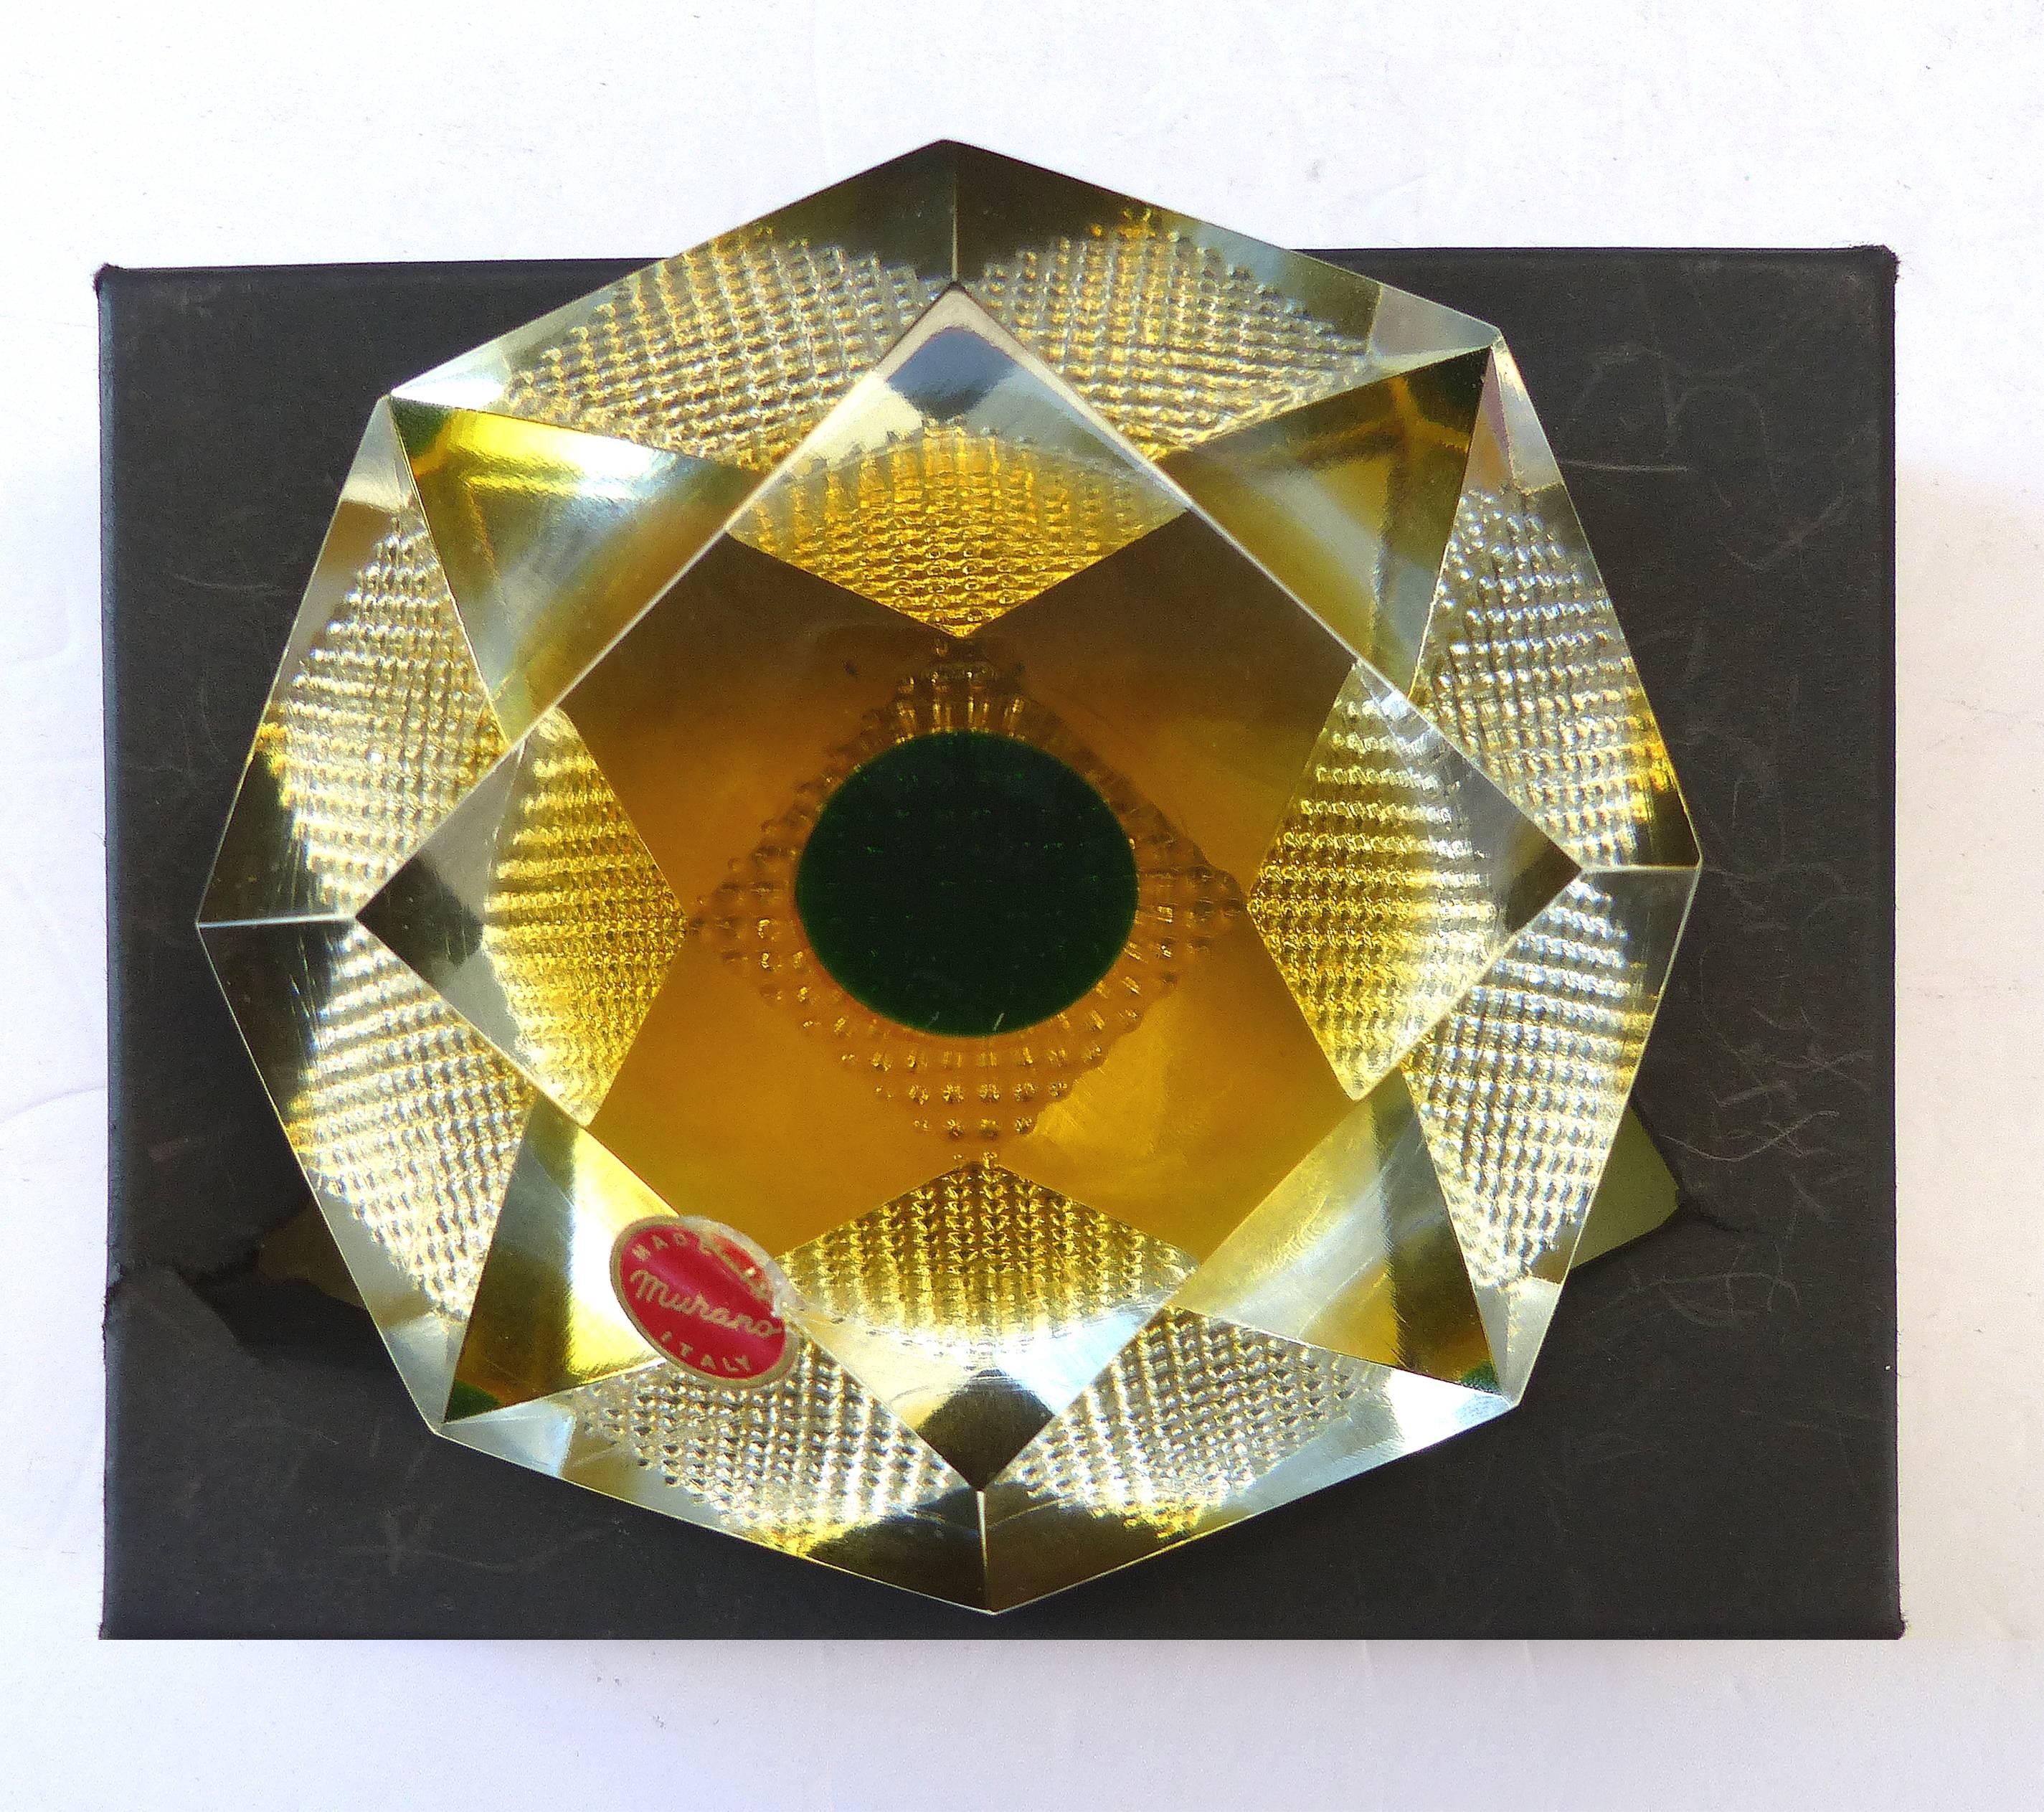 Murano Glass Brilliant-Cut Diamond Form Object D'art Paperweight in Box

Offered for sale is a brilliant-cut diamond form Murano glass paperweight. The glass object d'art retains the original Murano Sticker and includes the original box. Originally